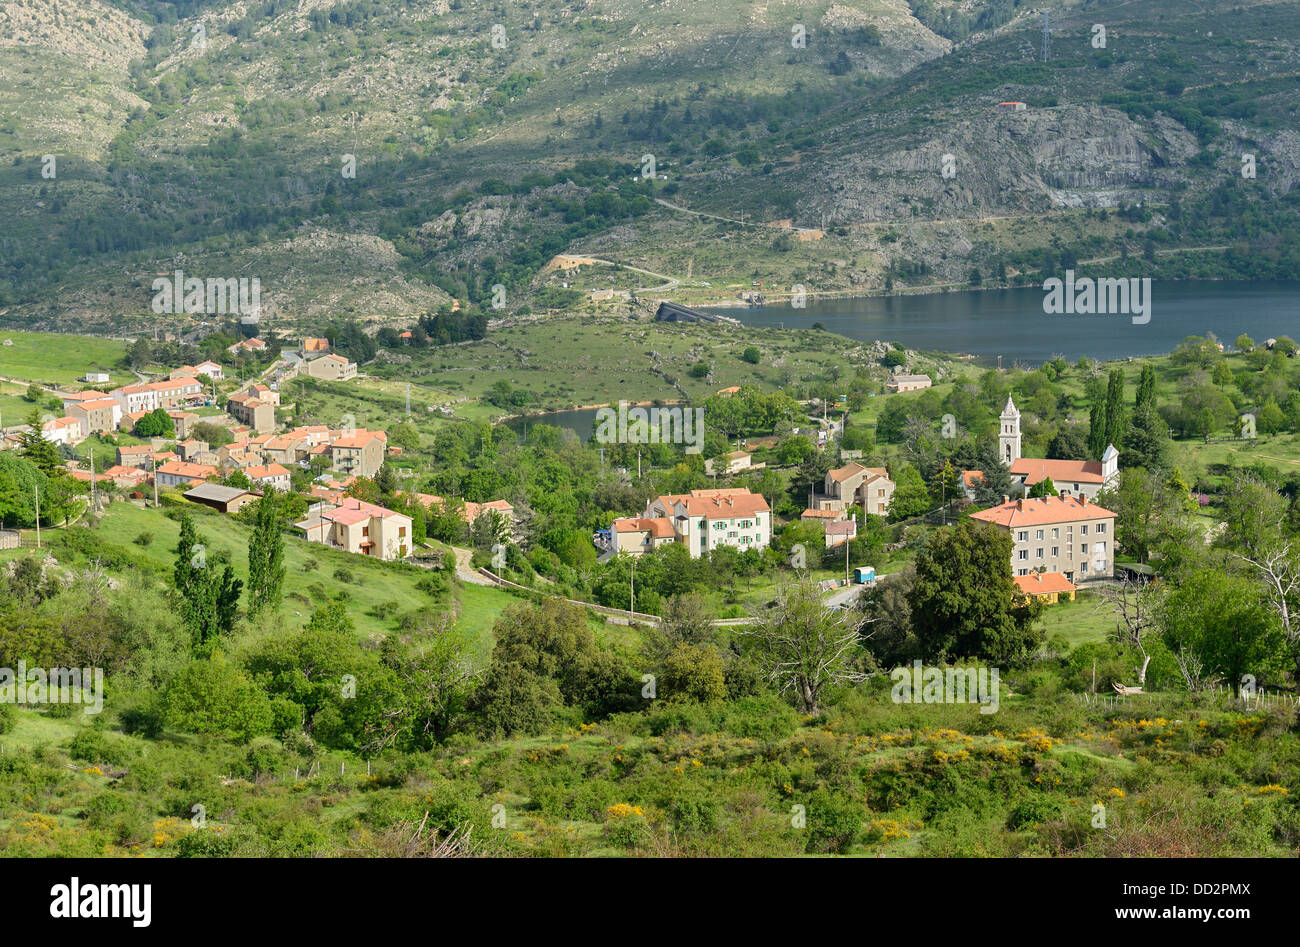 Aerial view of village of Calacuccia, Niolo Valley, Central Massif, Corsica, France Stock Photo